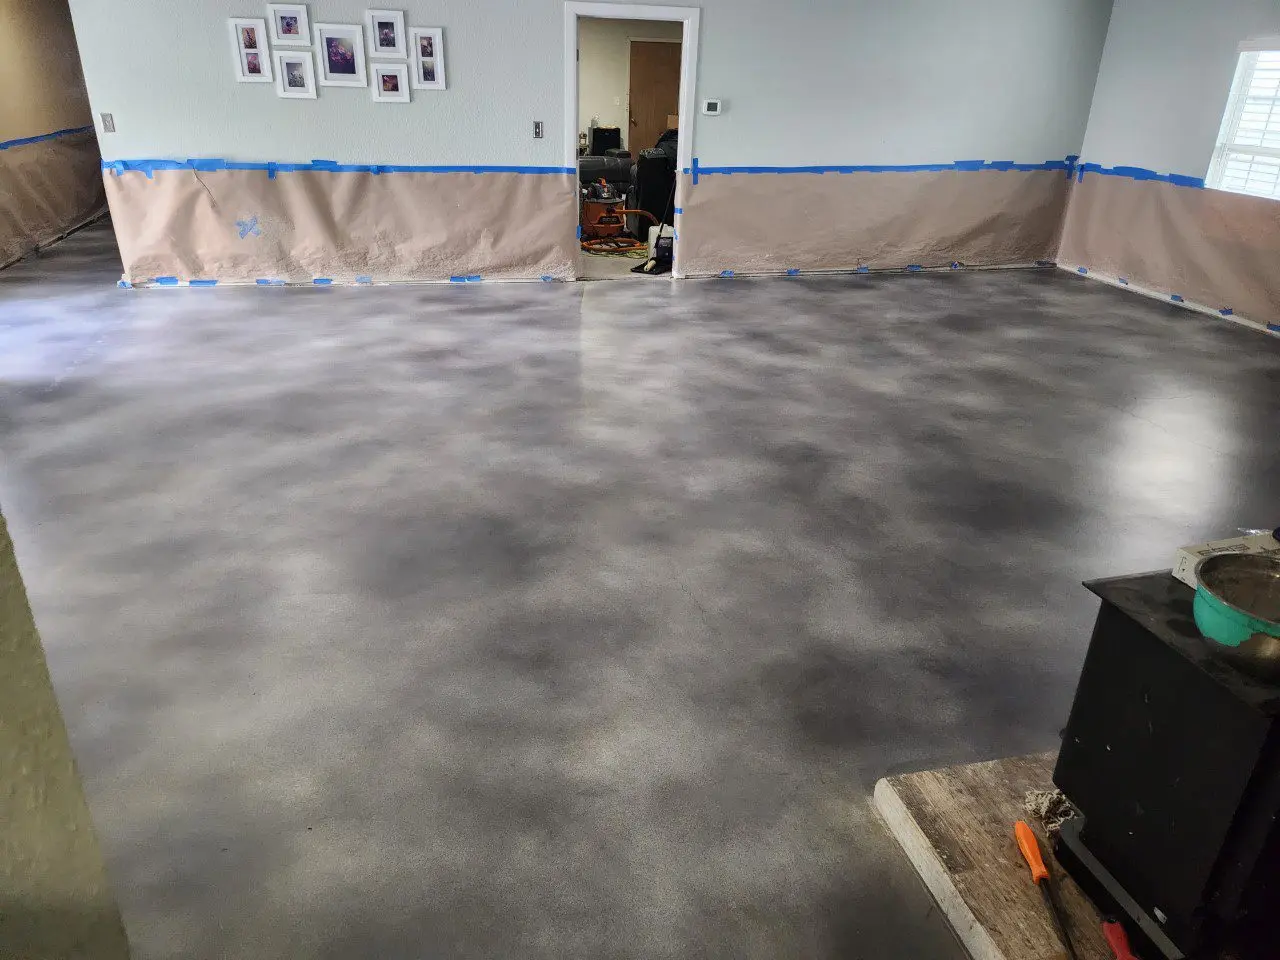 After Applying AcquaSeal Satin Sealer - Concrete floor with a protective coating of satin sealer, enhancing the vibrancy of the dye